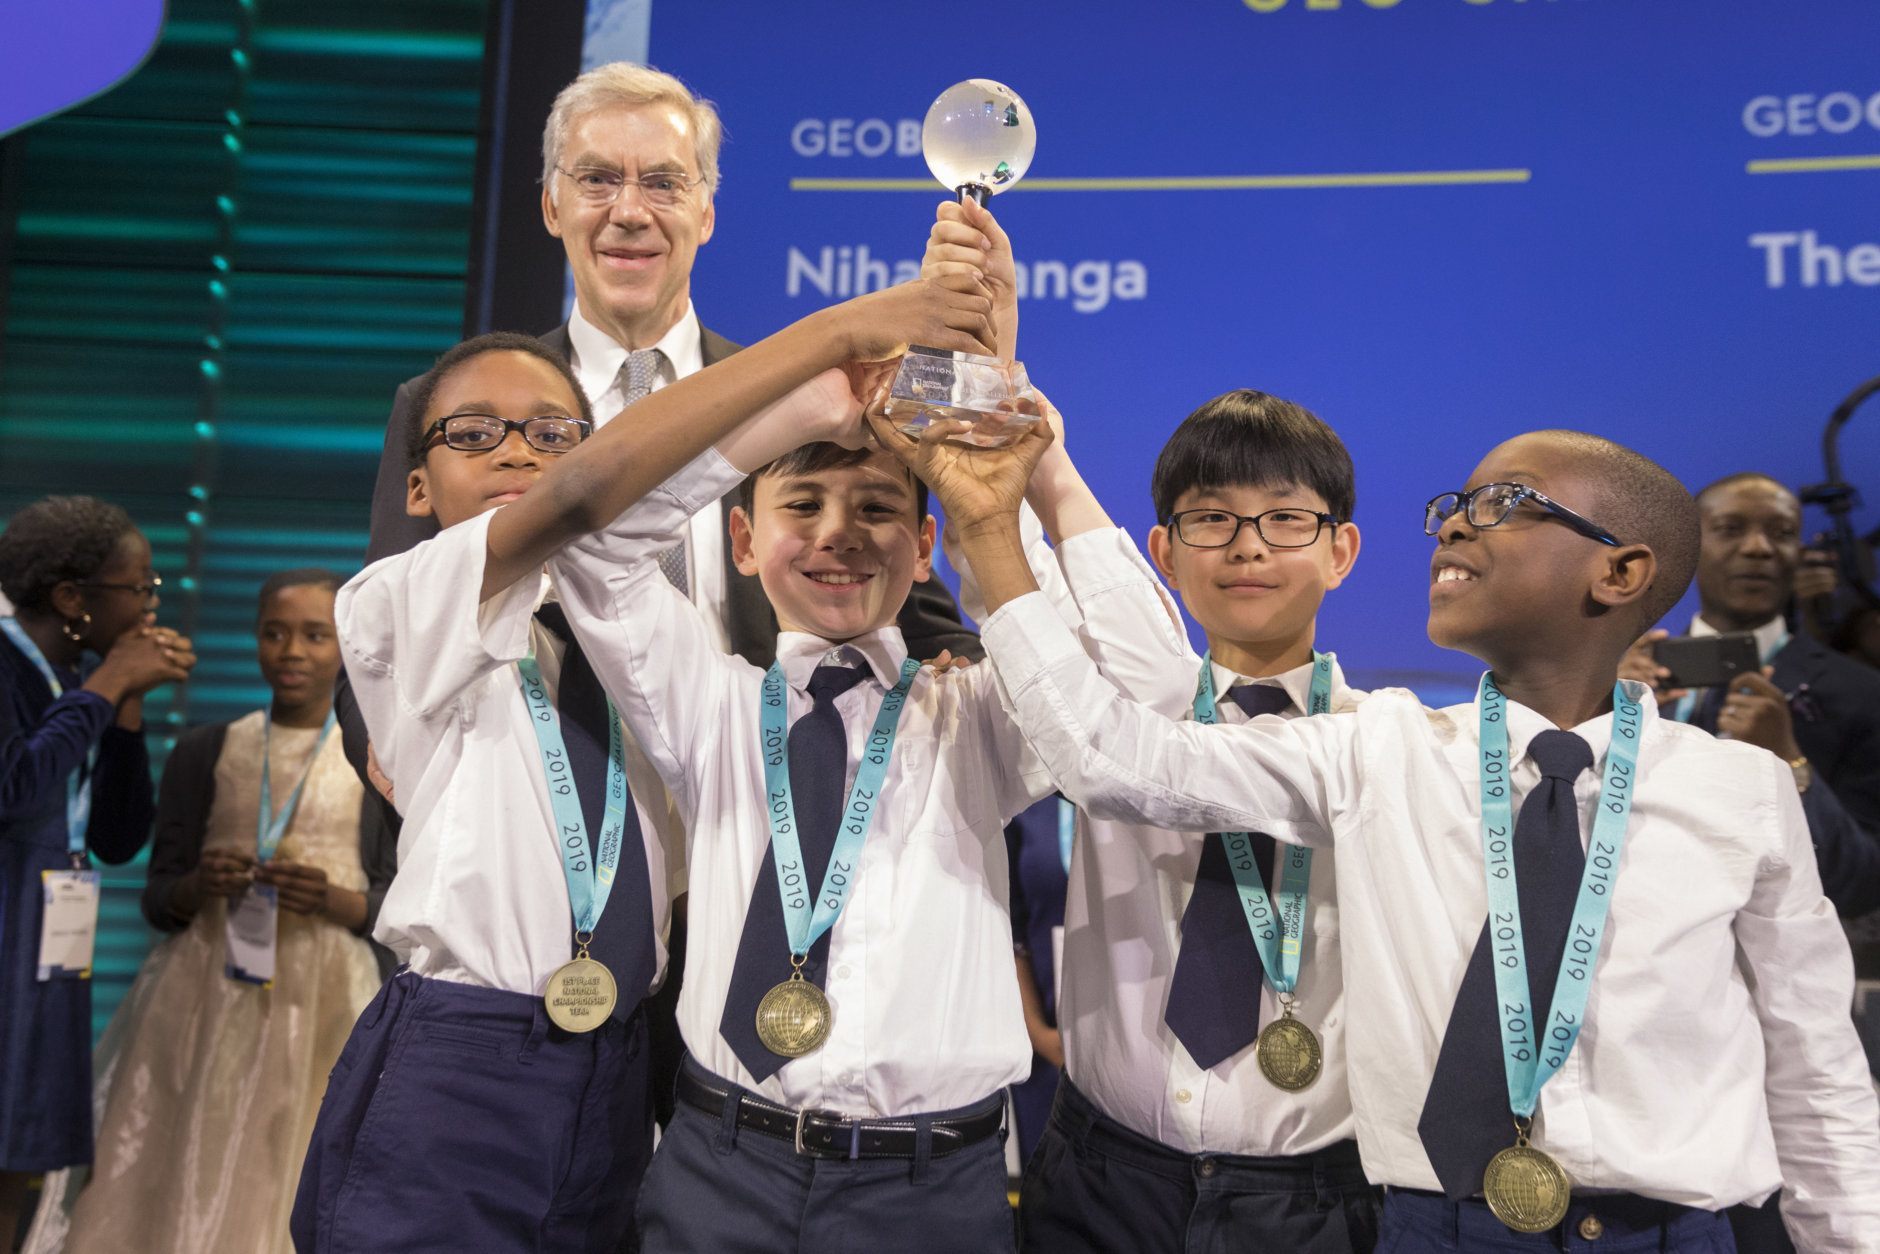 PERMITTED USE: This image may be downloaded or is otherwise provided at no charge for one-time use for coverage or promotion of the 2019 National Geographic Bee. Copying, distribution, archiving, sub-licensing, sale, or resale of the image is prohibited.
REQUIRED CREDIT AND CAPTION: Any and all image uses must (1) be properly credited to the relevant photographer and (2) be accompanied by a caption which makes reference to the 2019 National Geographic Bee.
DEFAULT: Failure to comply with the prohibitions and requirements set forth above will obligate the individual or entity receiving this image to pay a fee determined by National Geographic.